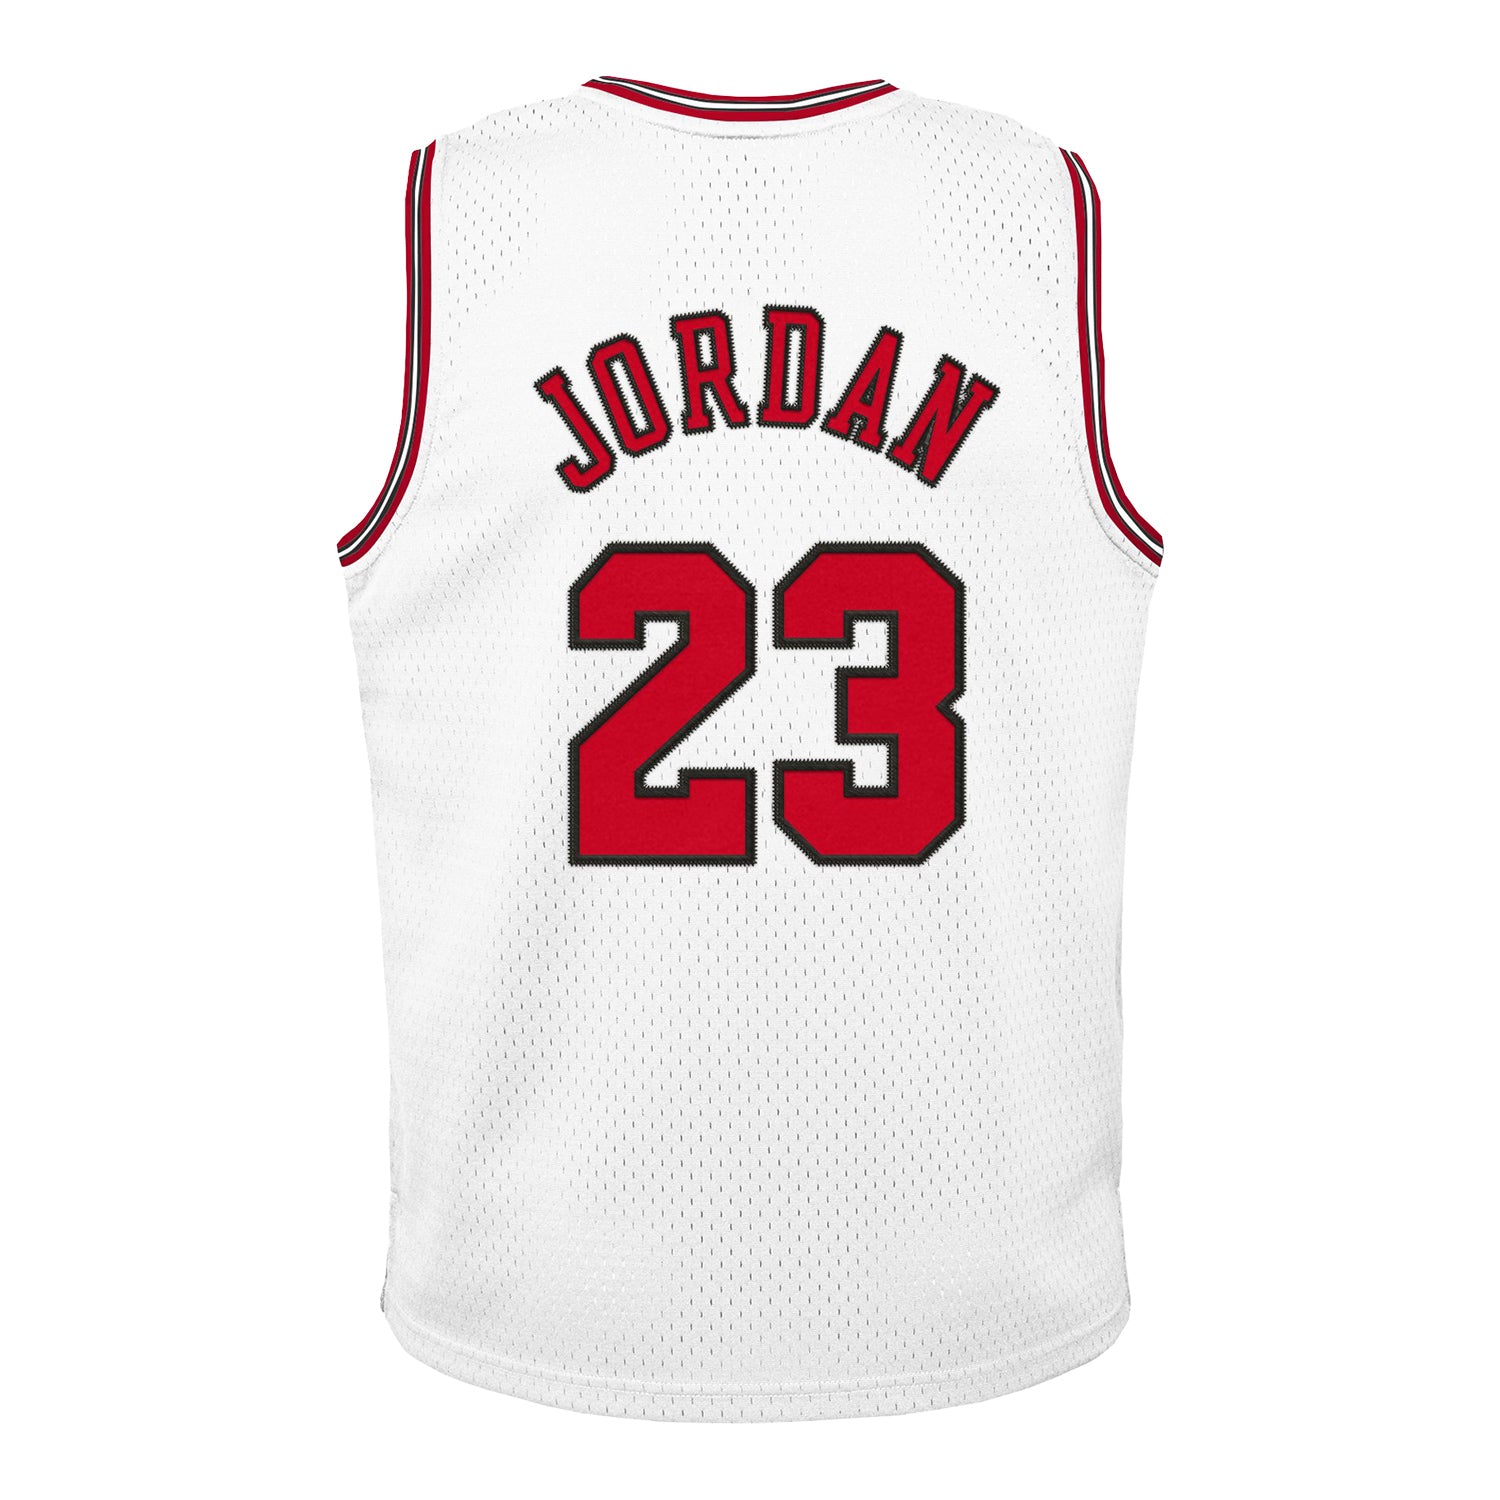 Youth Chicago Bulls Authentic Mitchell & Ness Michael Jordan 1997-98 Jersey - back view